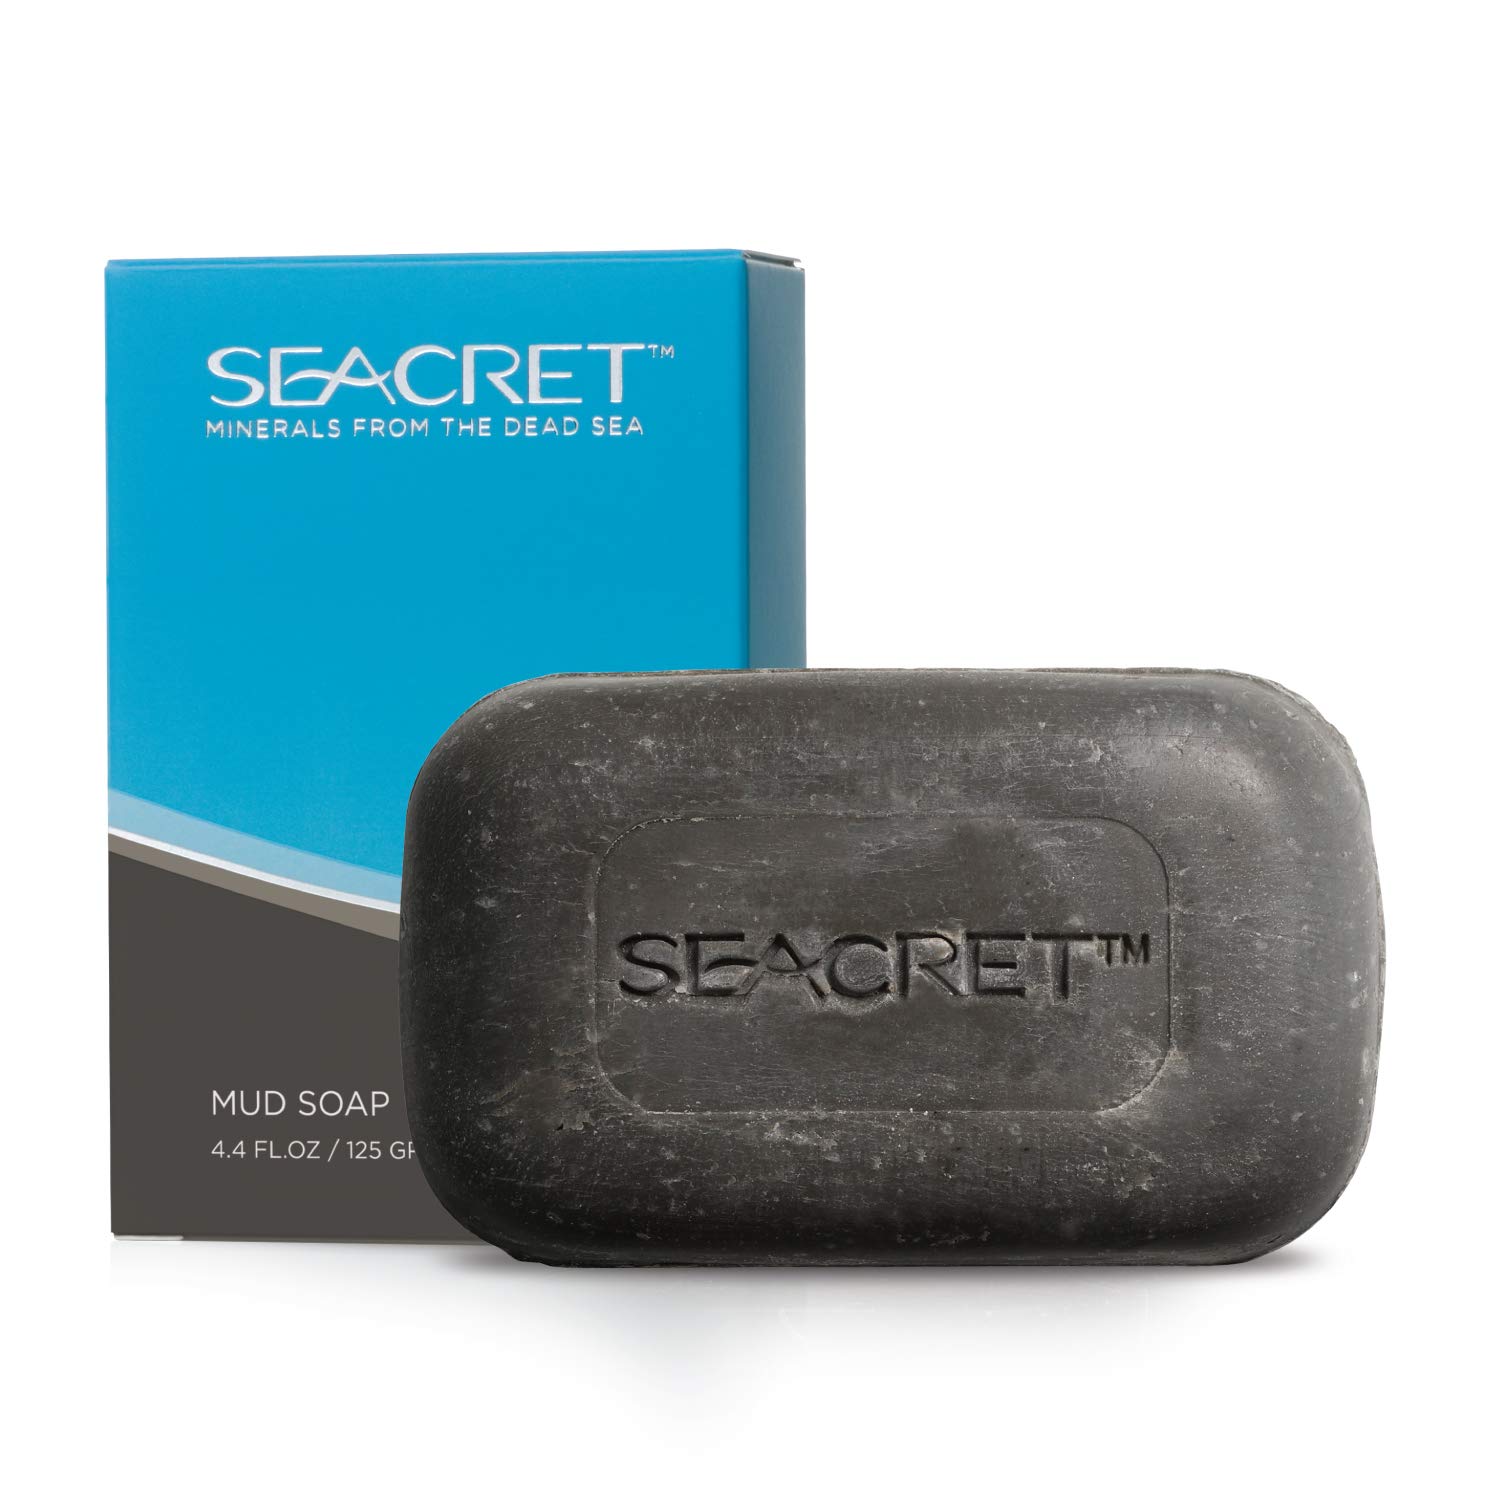 SEACRET Minerals From The Dead Sea Mud Soap For Face and Body. Gently Cleanses Your Facial Skin and Gives It a Healthy Glow, All Natural Soap, Suitable for Normal to Oily Skin, Cruelty Free, SLS Free, Paraben Free, Gluten Free, 4.4 oz